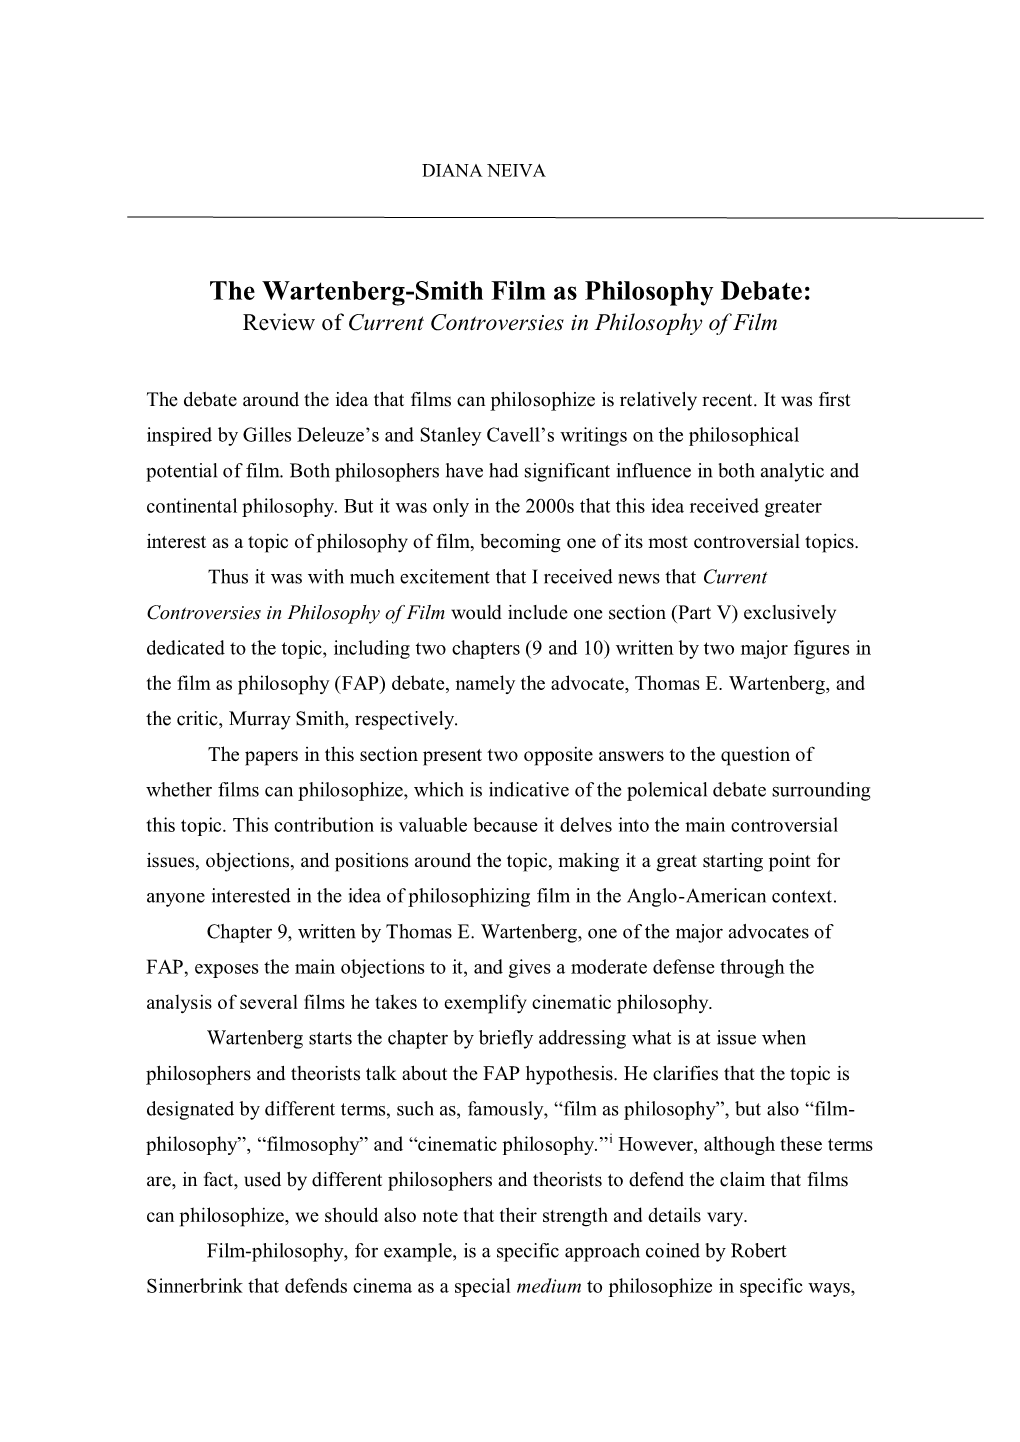 The Wartenberg-Smith Film As Philosophy Debate: Review of Current Controversies in Philosophy of Film